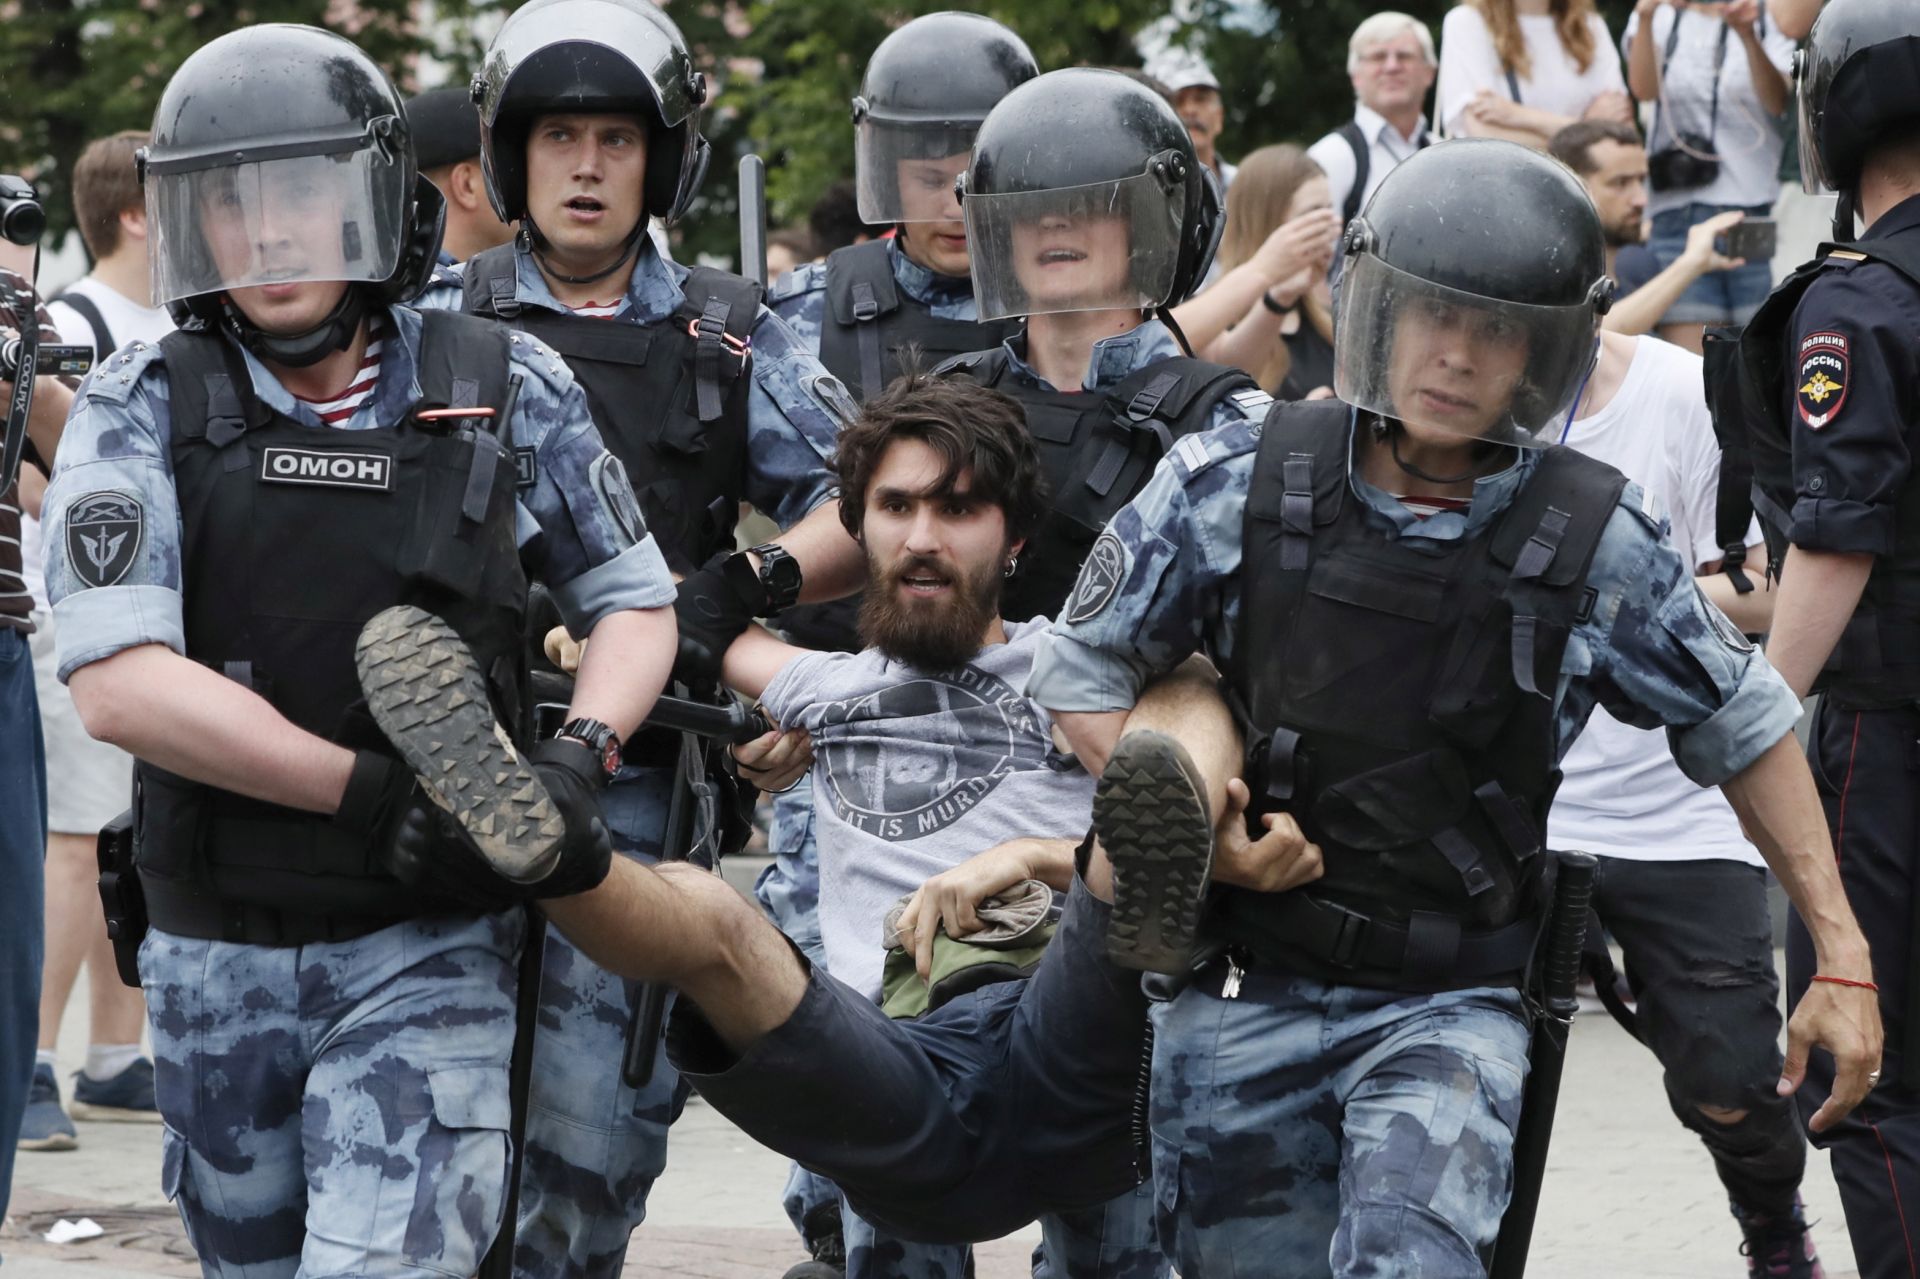 epa07643300 Russian riot police detain a participant of a protest  supporting arrested and now released Meduza's journalist Ivan Golunov suspected in drug keeping and spreading in Moscow, Russia, 12 June 2019. Ivan Golunov, a journalist specialized in corruption cases investigations was arrested by police for drug spreading and later released after a wave of public protests. Ivan Golunov denies the accusation and considers it a provocation caused by his professional activity.  EPA/YURI KOCHETKOV